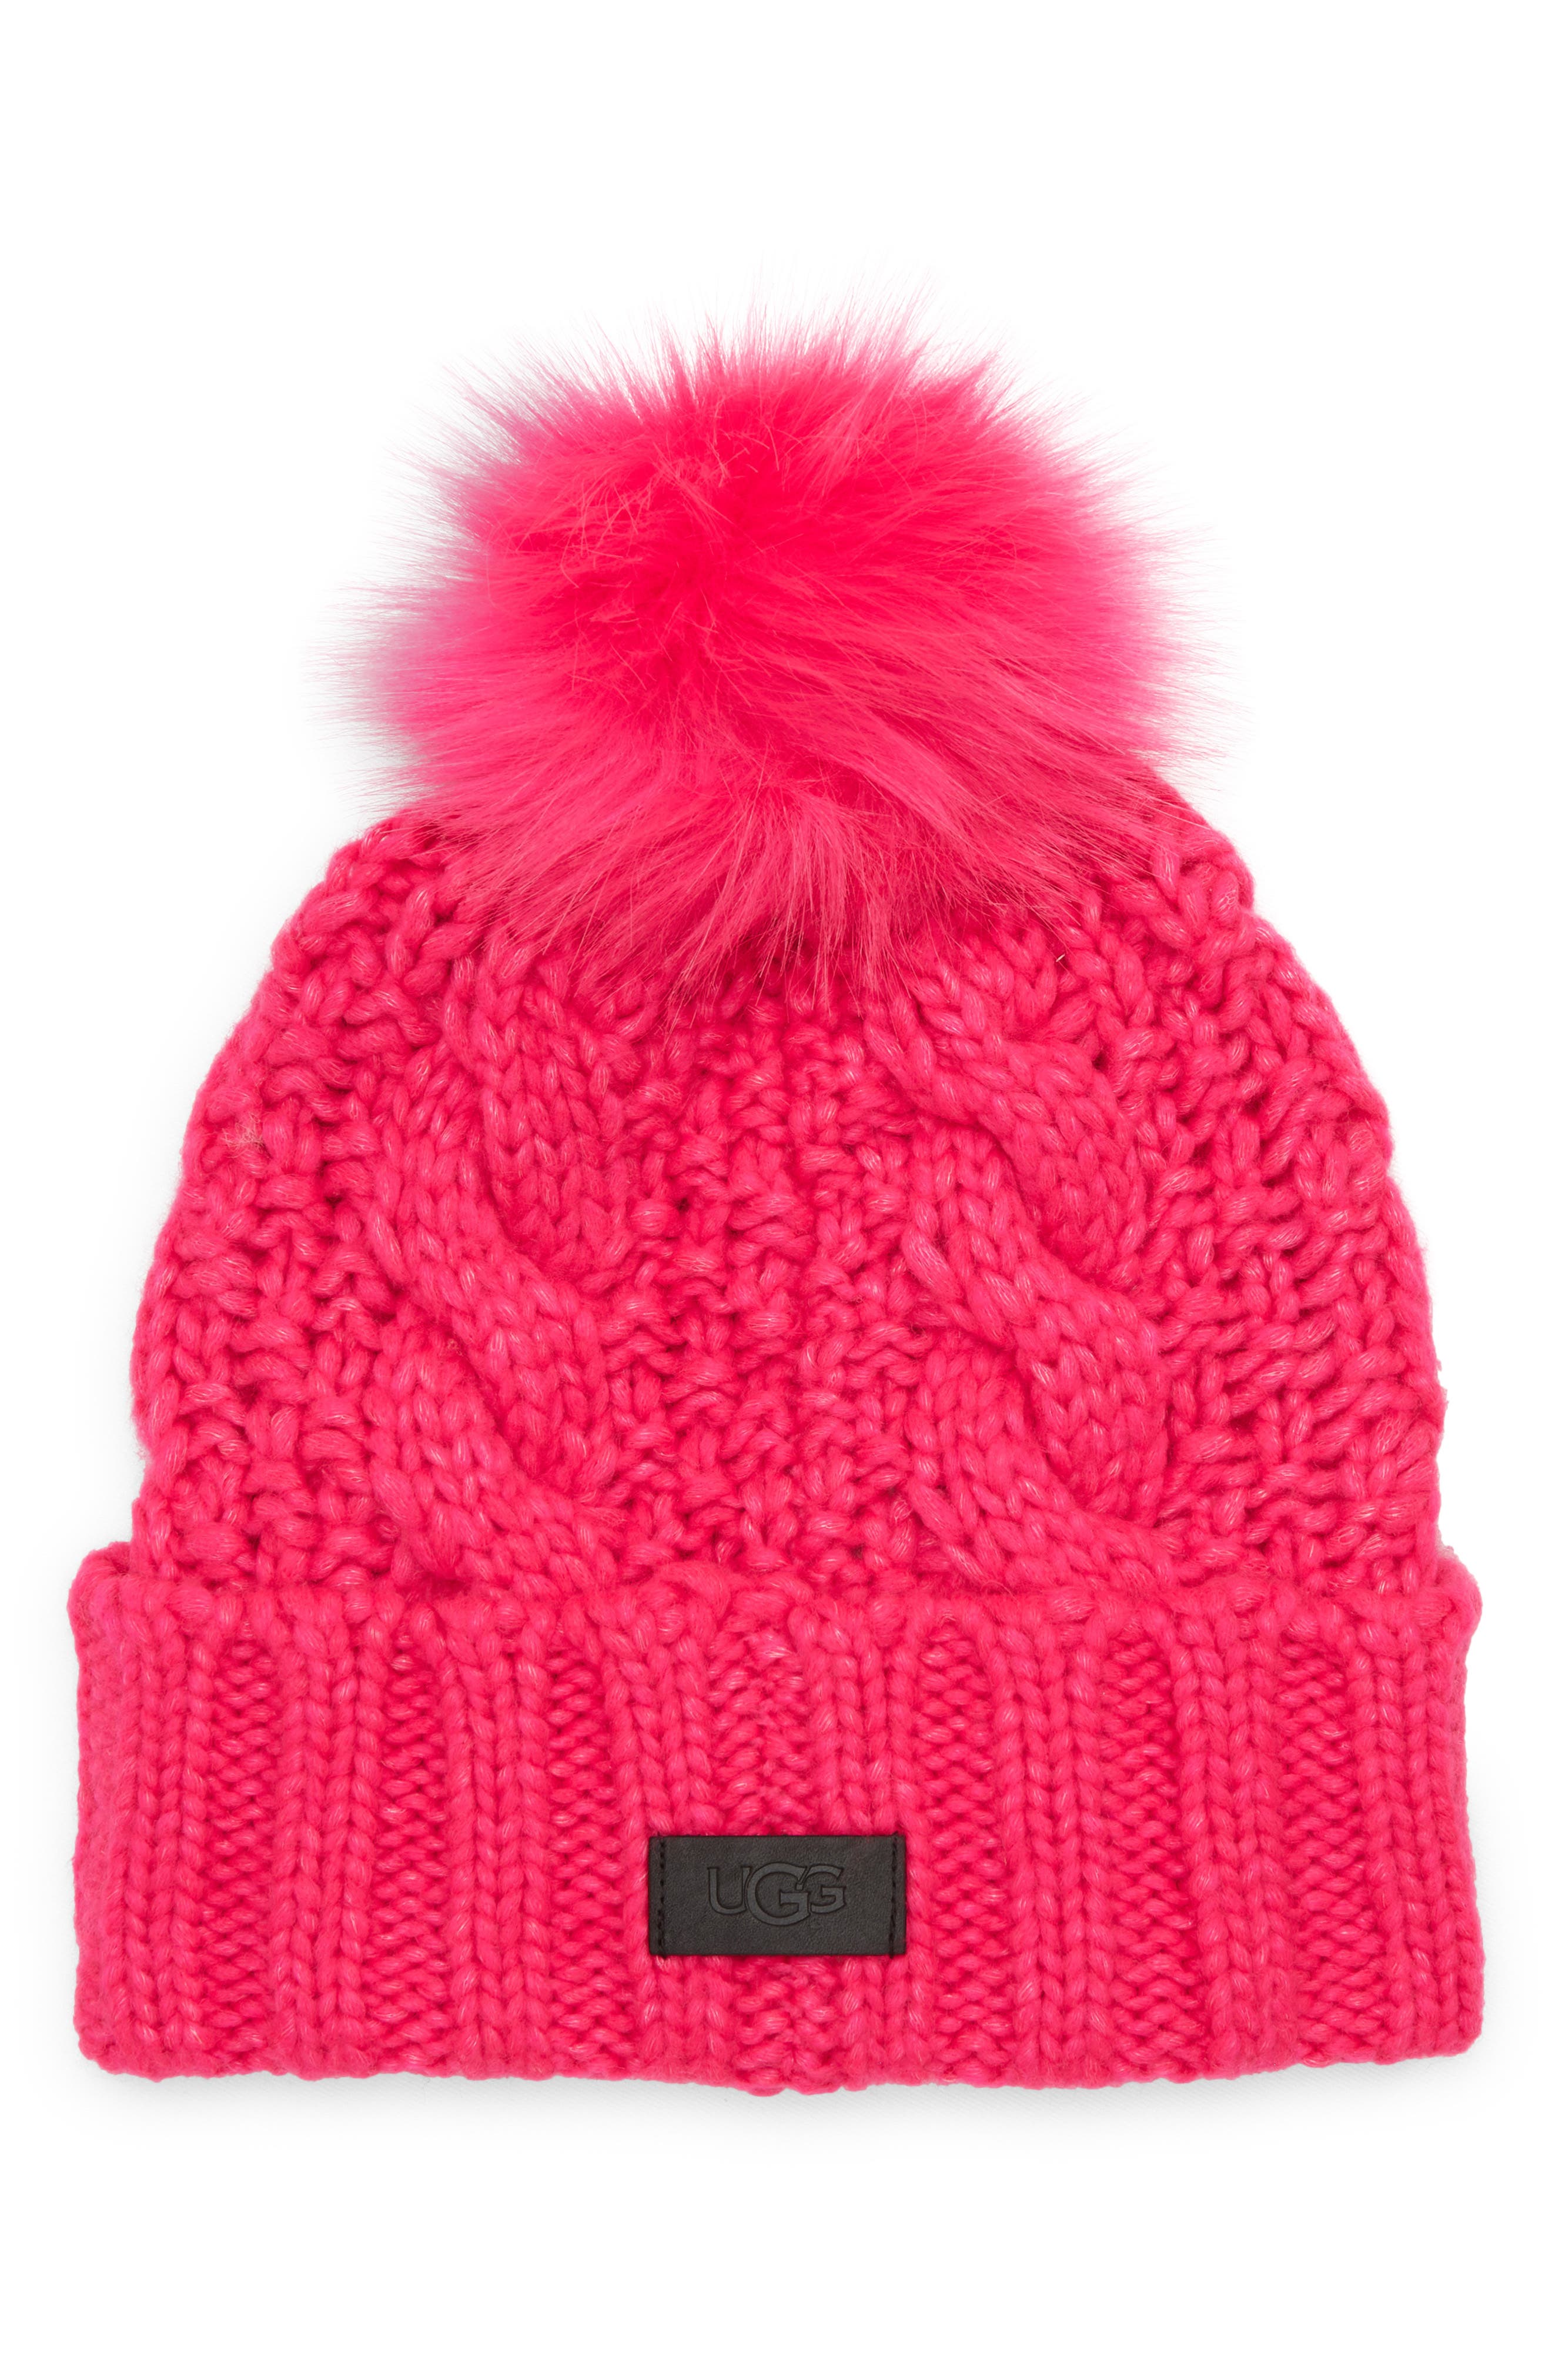 Pink Single NoName Pink knitted cap pompom discount 73% WOMEN FASHION Accessories Hat and cap Pink 